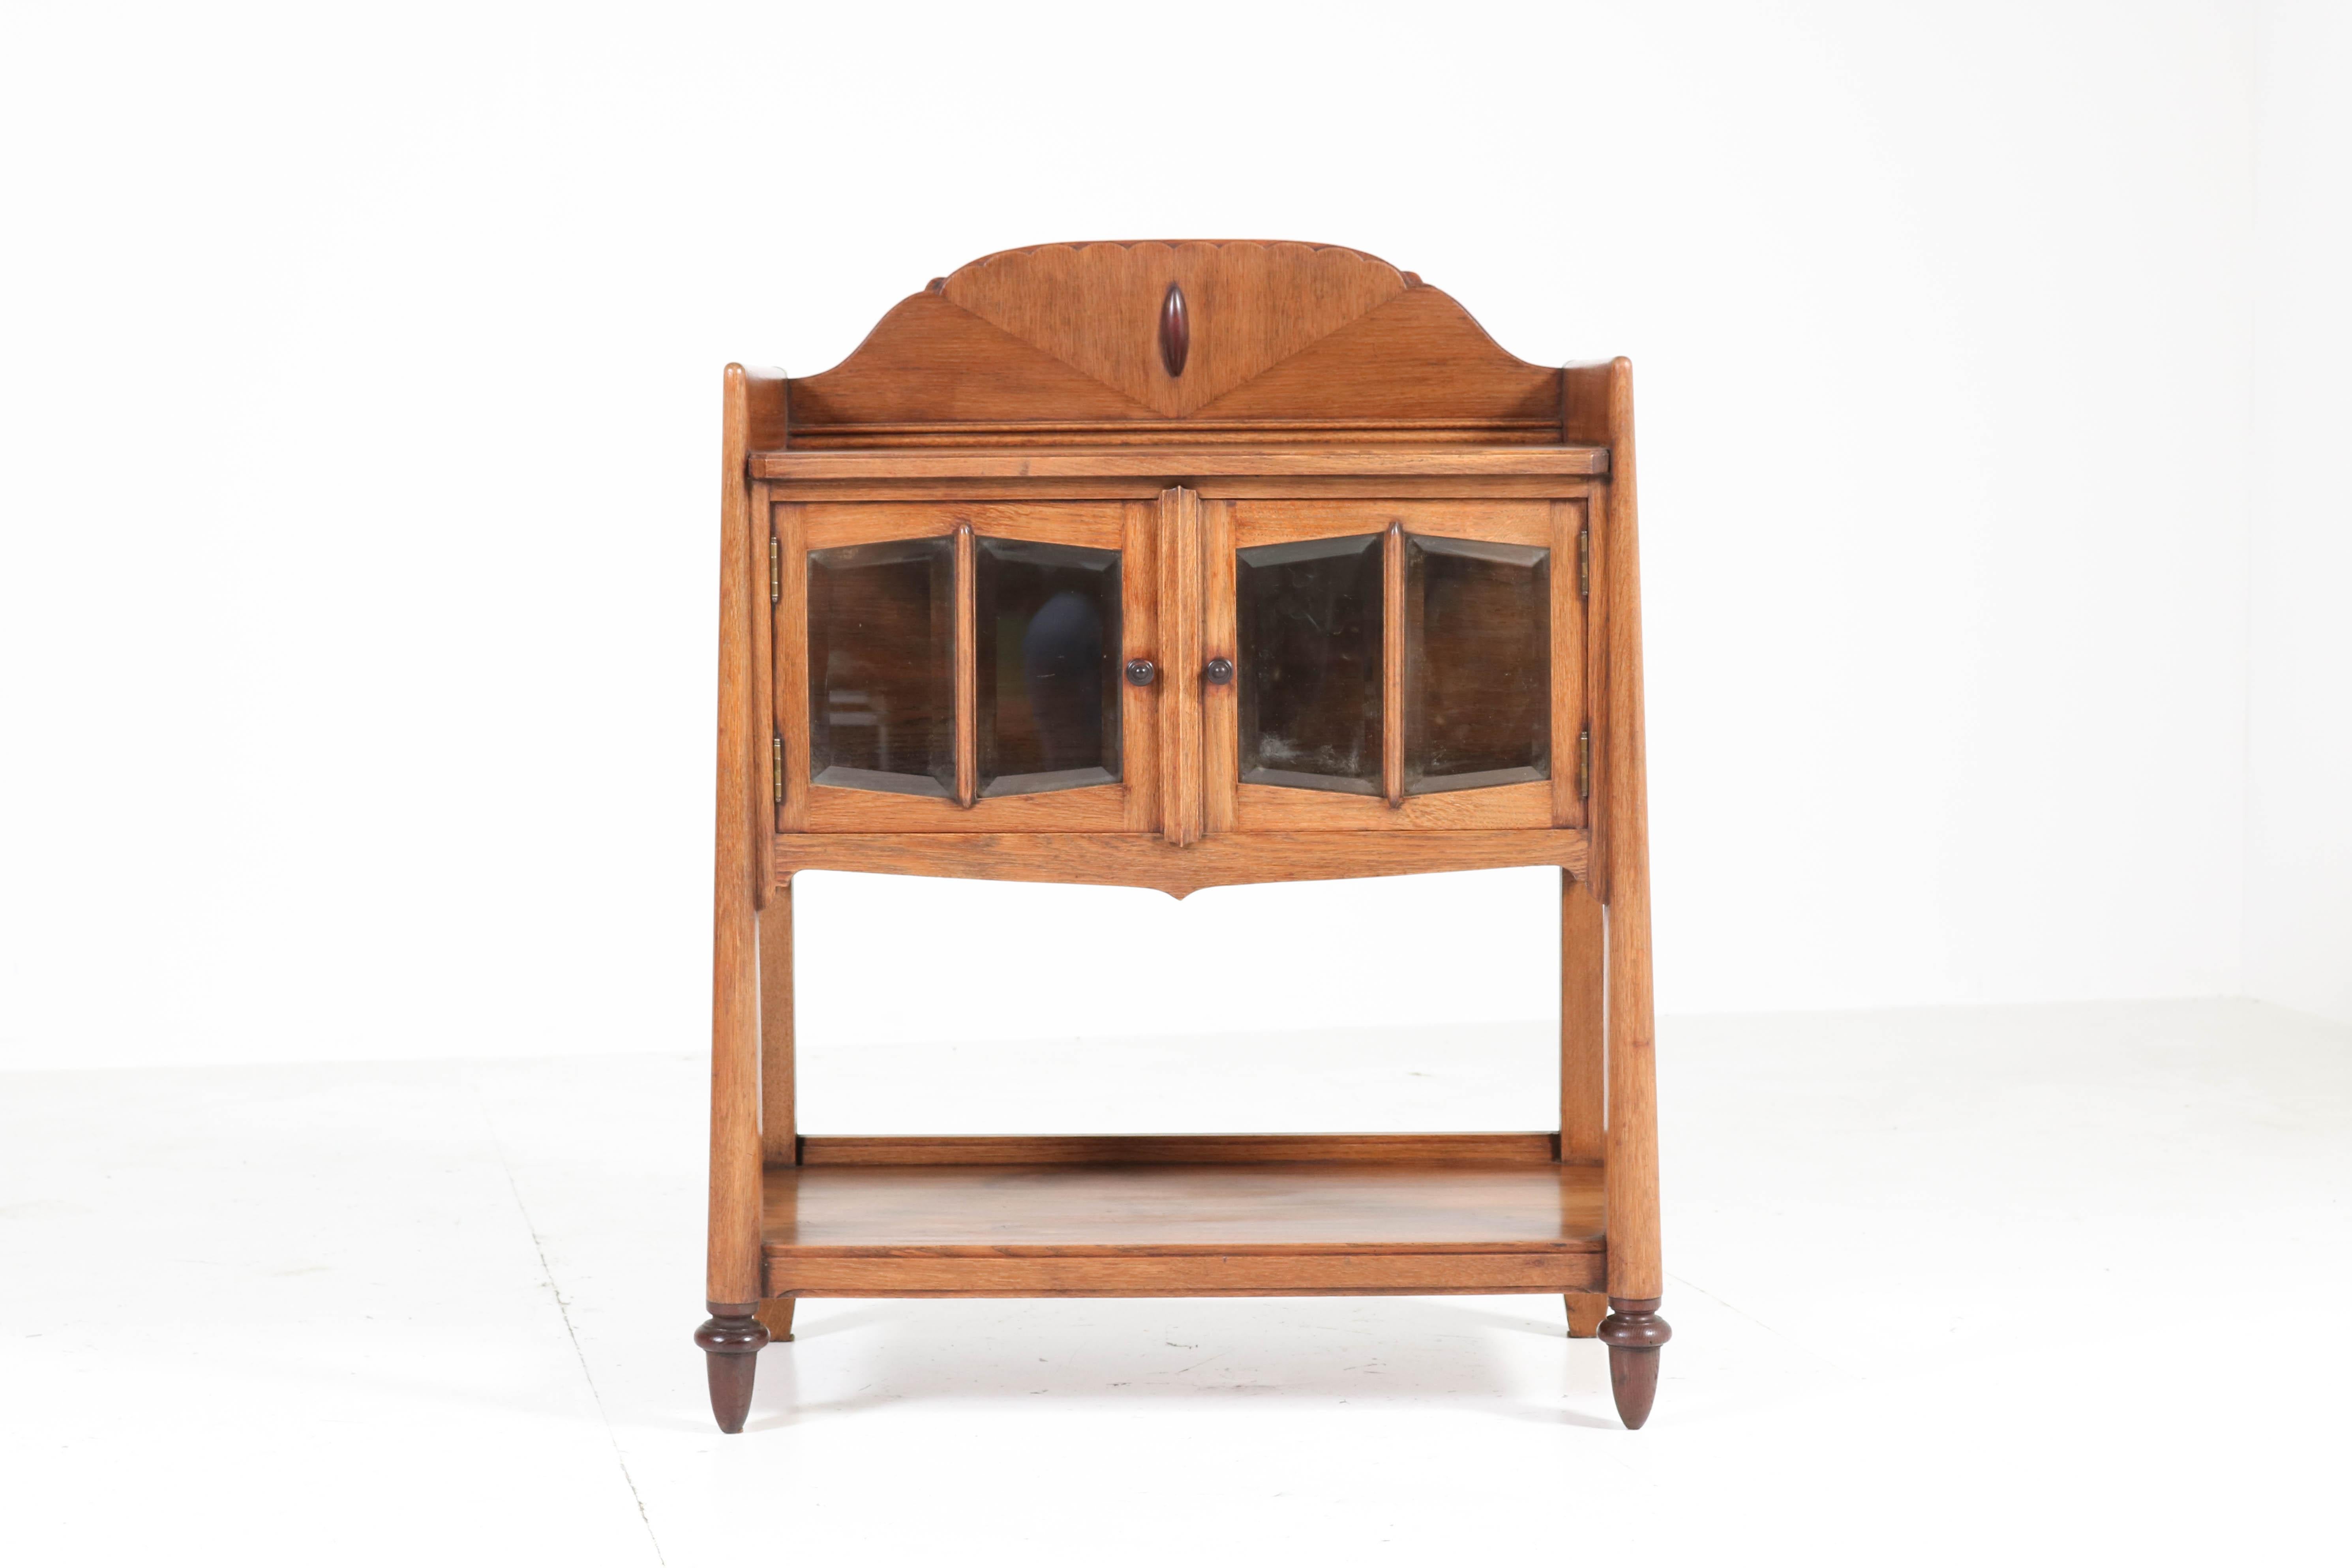 Wonderful Art Deco Amsterdam School tea cabinet.
Design by S. Speelman Wz Rotterdam.
Striking Dutch design from the 1920s.
Solid oak with original beveled glass in the two doors.
Marked with original manufacturers tag.
In very good condition